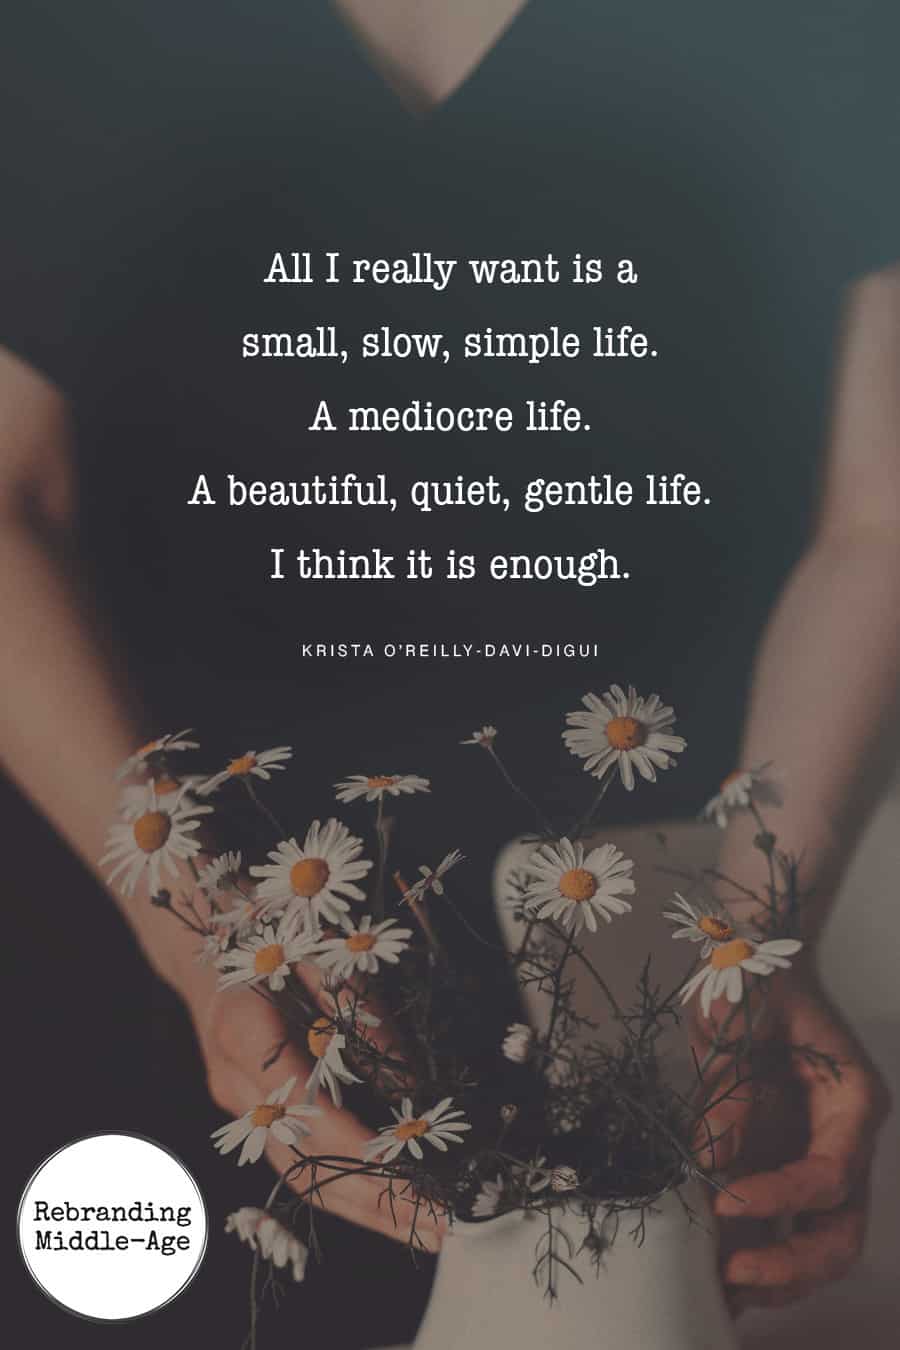 All I really want is a small, slow, simple life. A mediocre life. A beautiful, quiet, gentle life. I think it is enough. #quote *Love this quote and this entire post